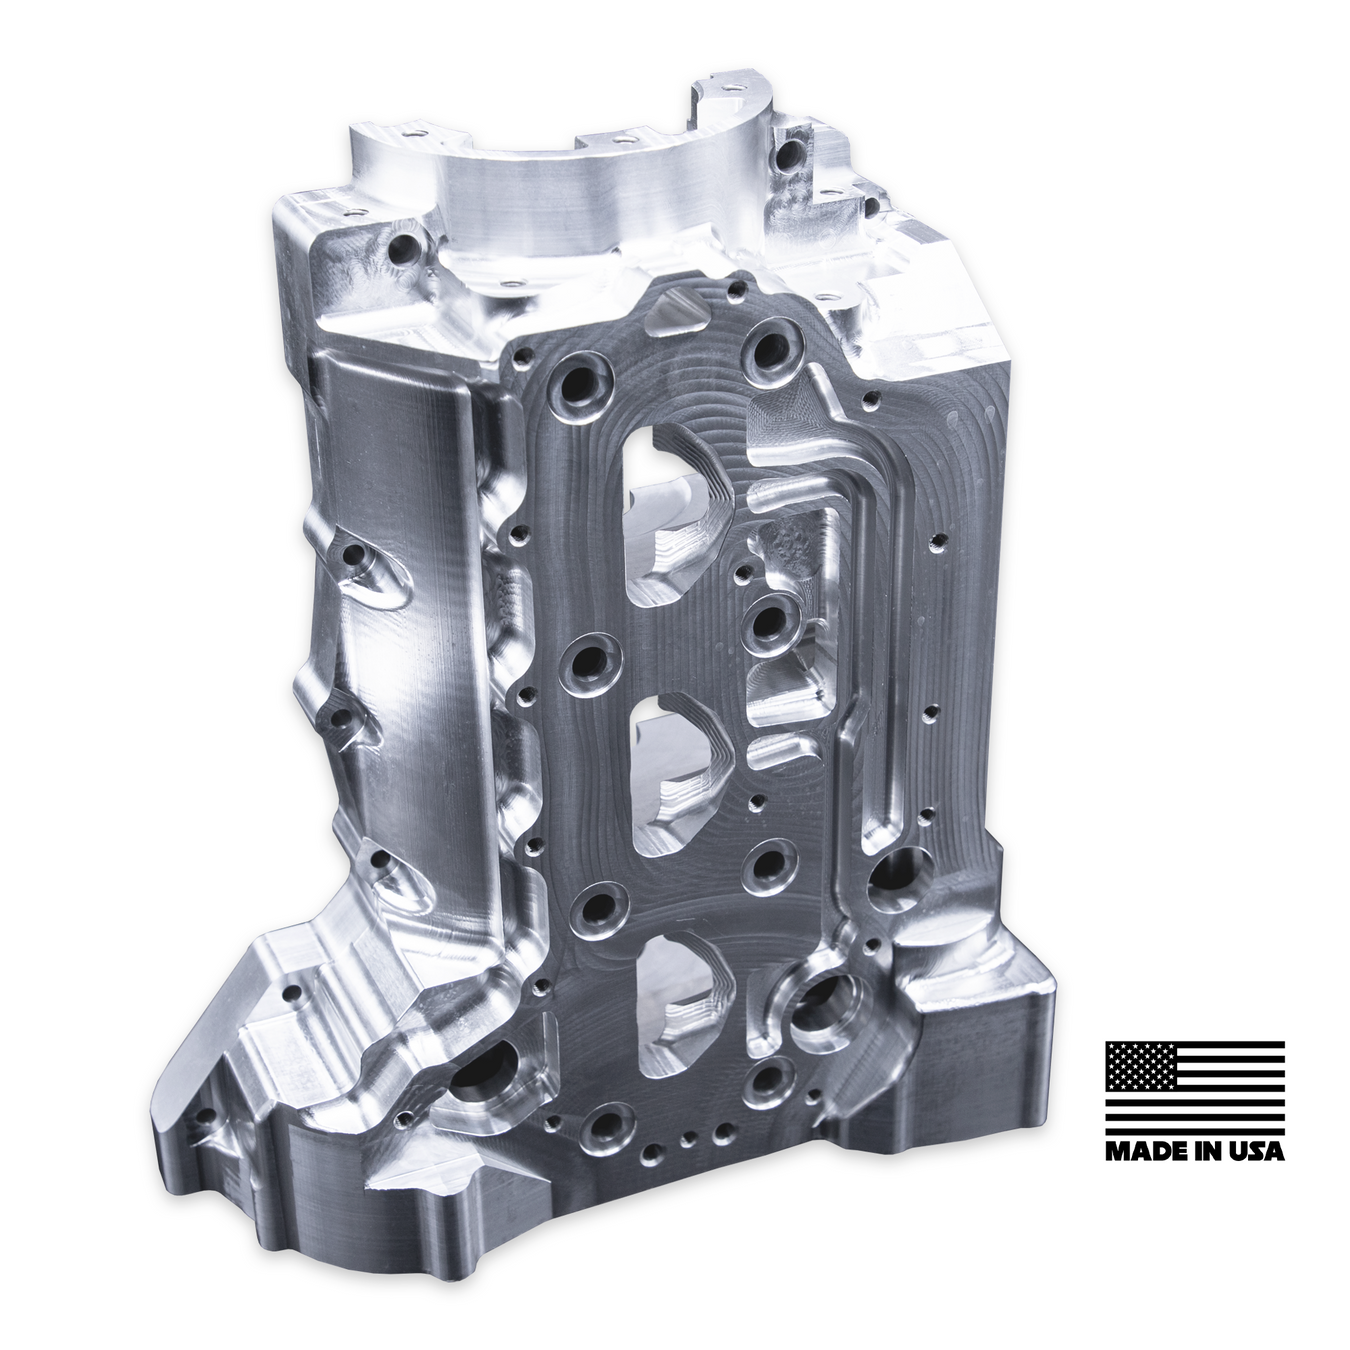 V4 Billet Girdle Long Block Related Products